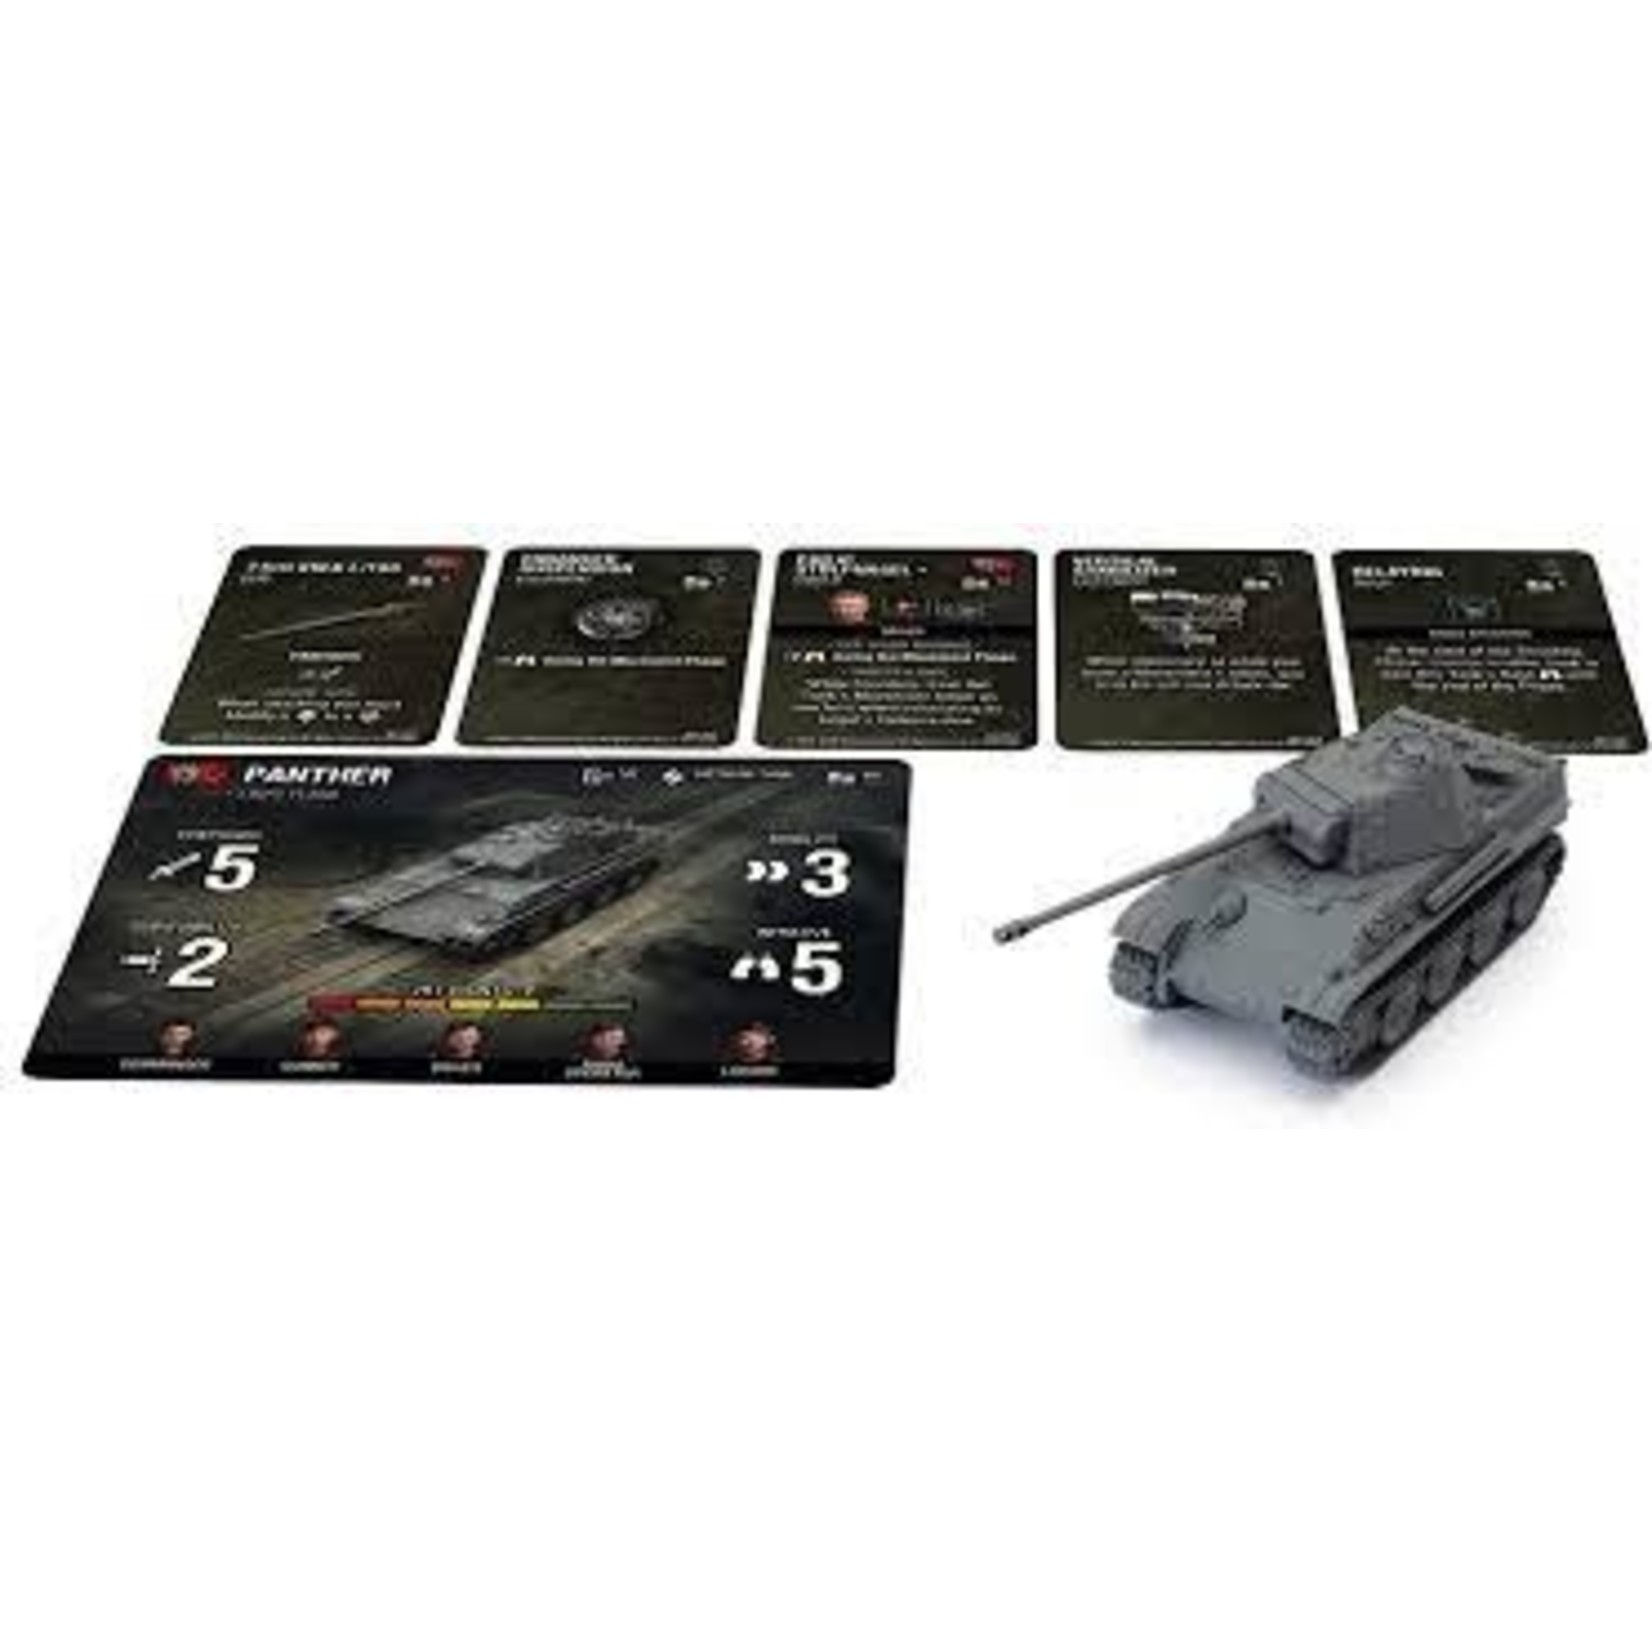 Gale Force 9 World of Tanks Expansion: German Panther